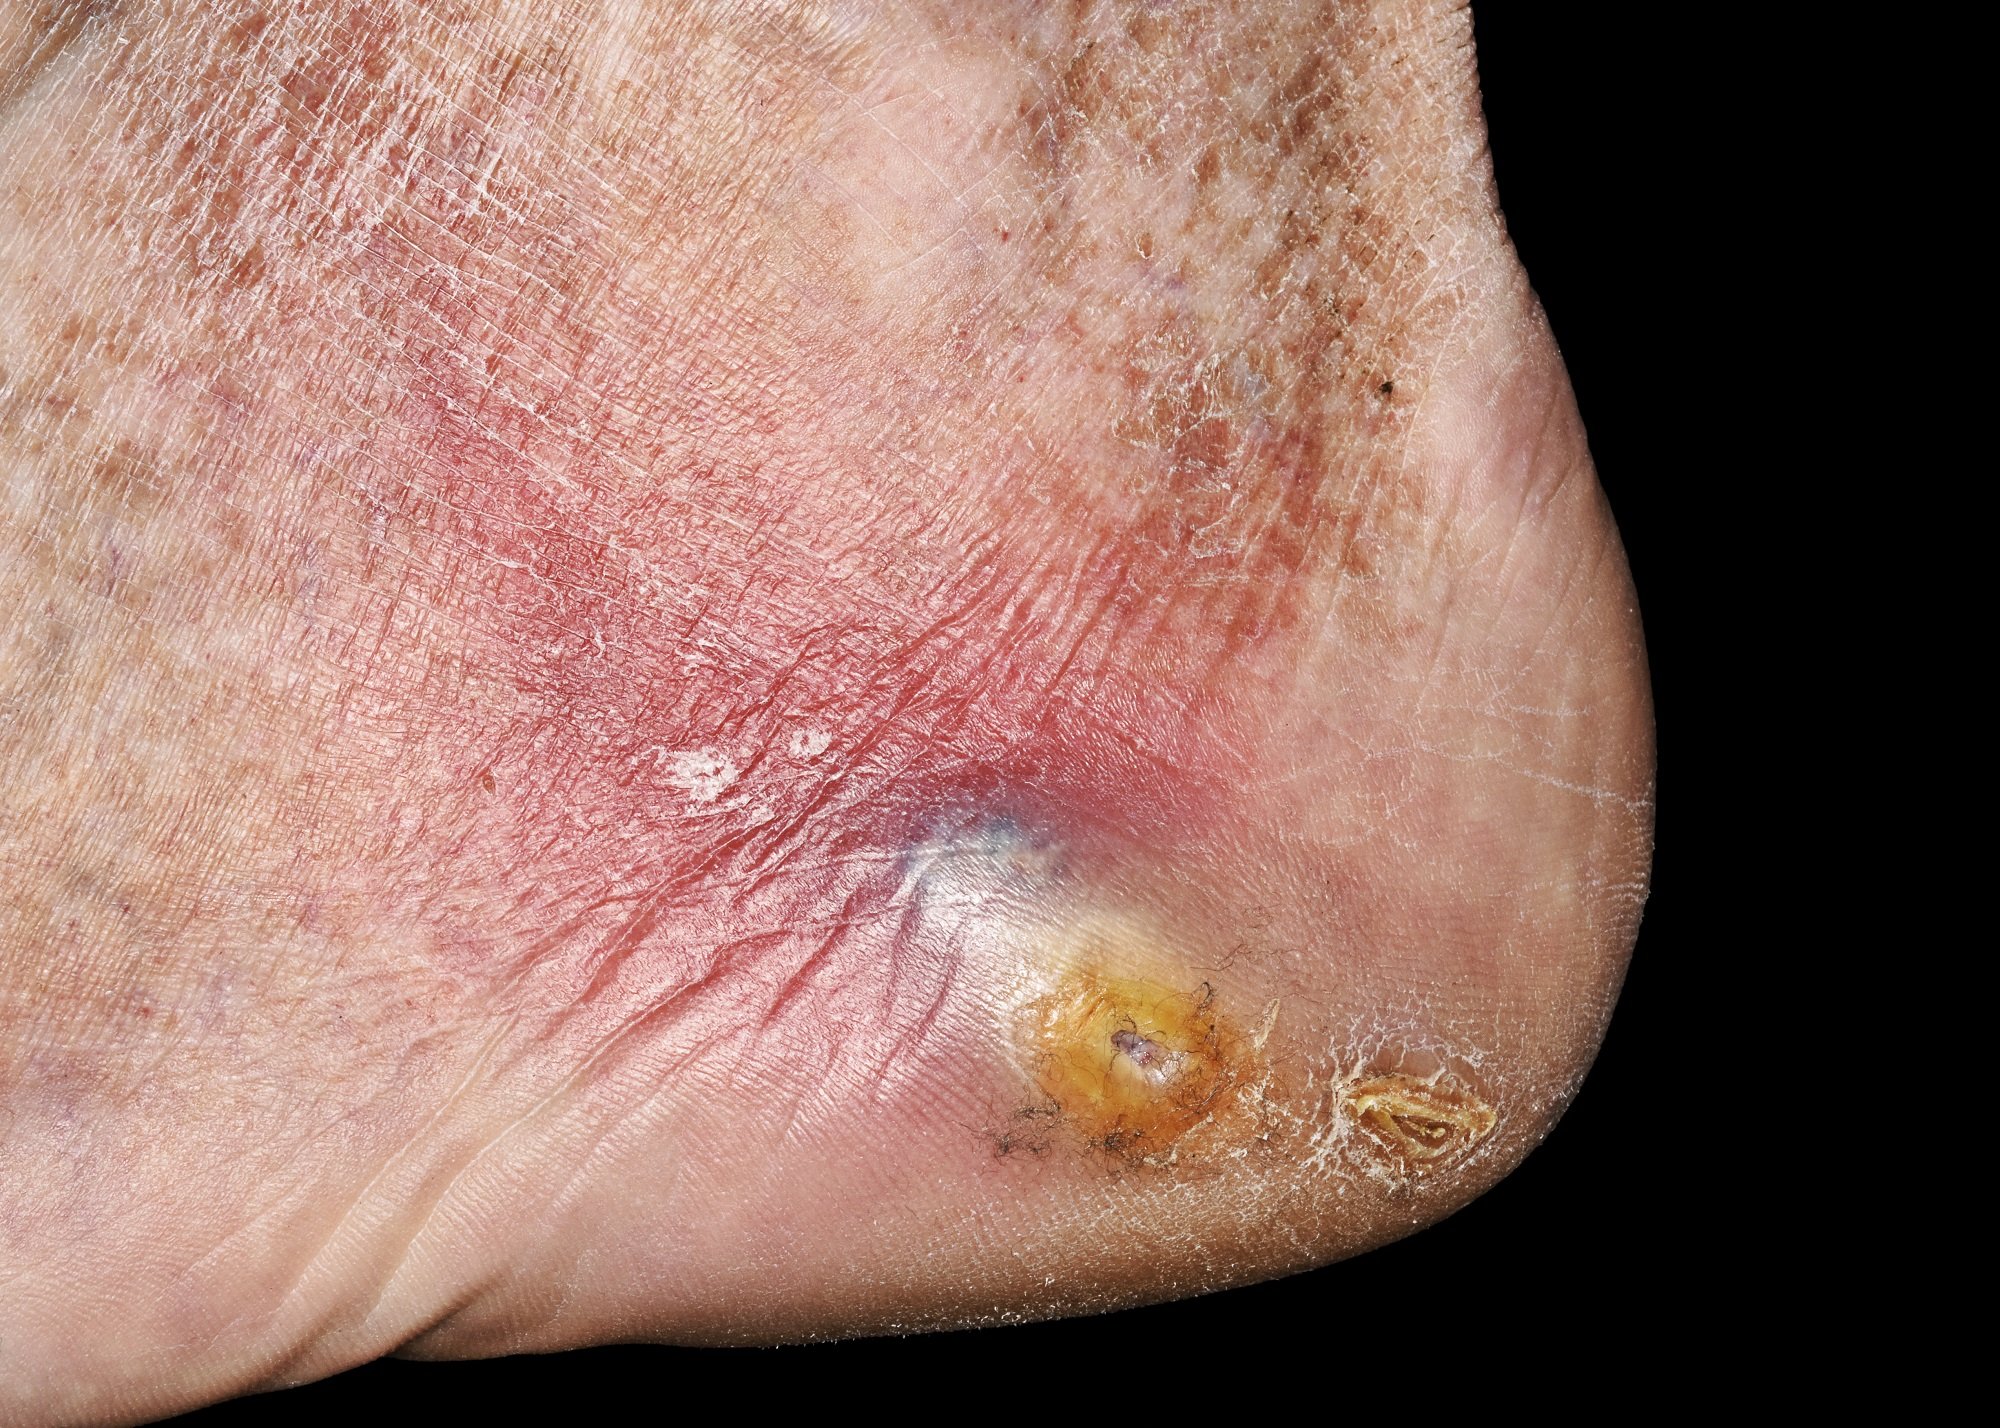 Treatment of Refractory Diabetic Foot Ulcers Improved With ...